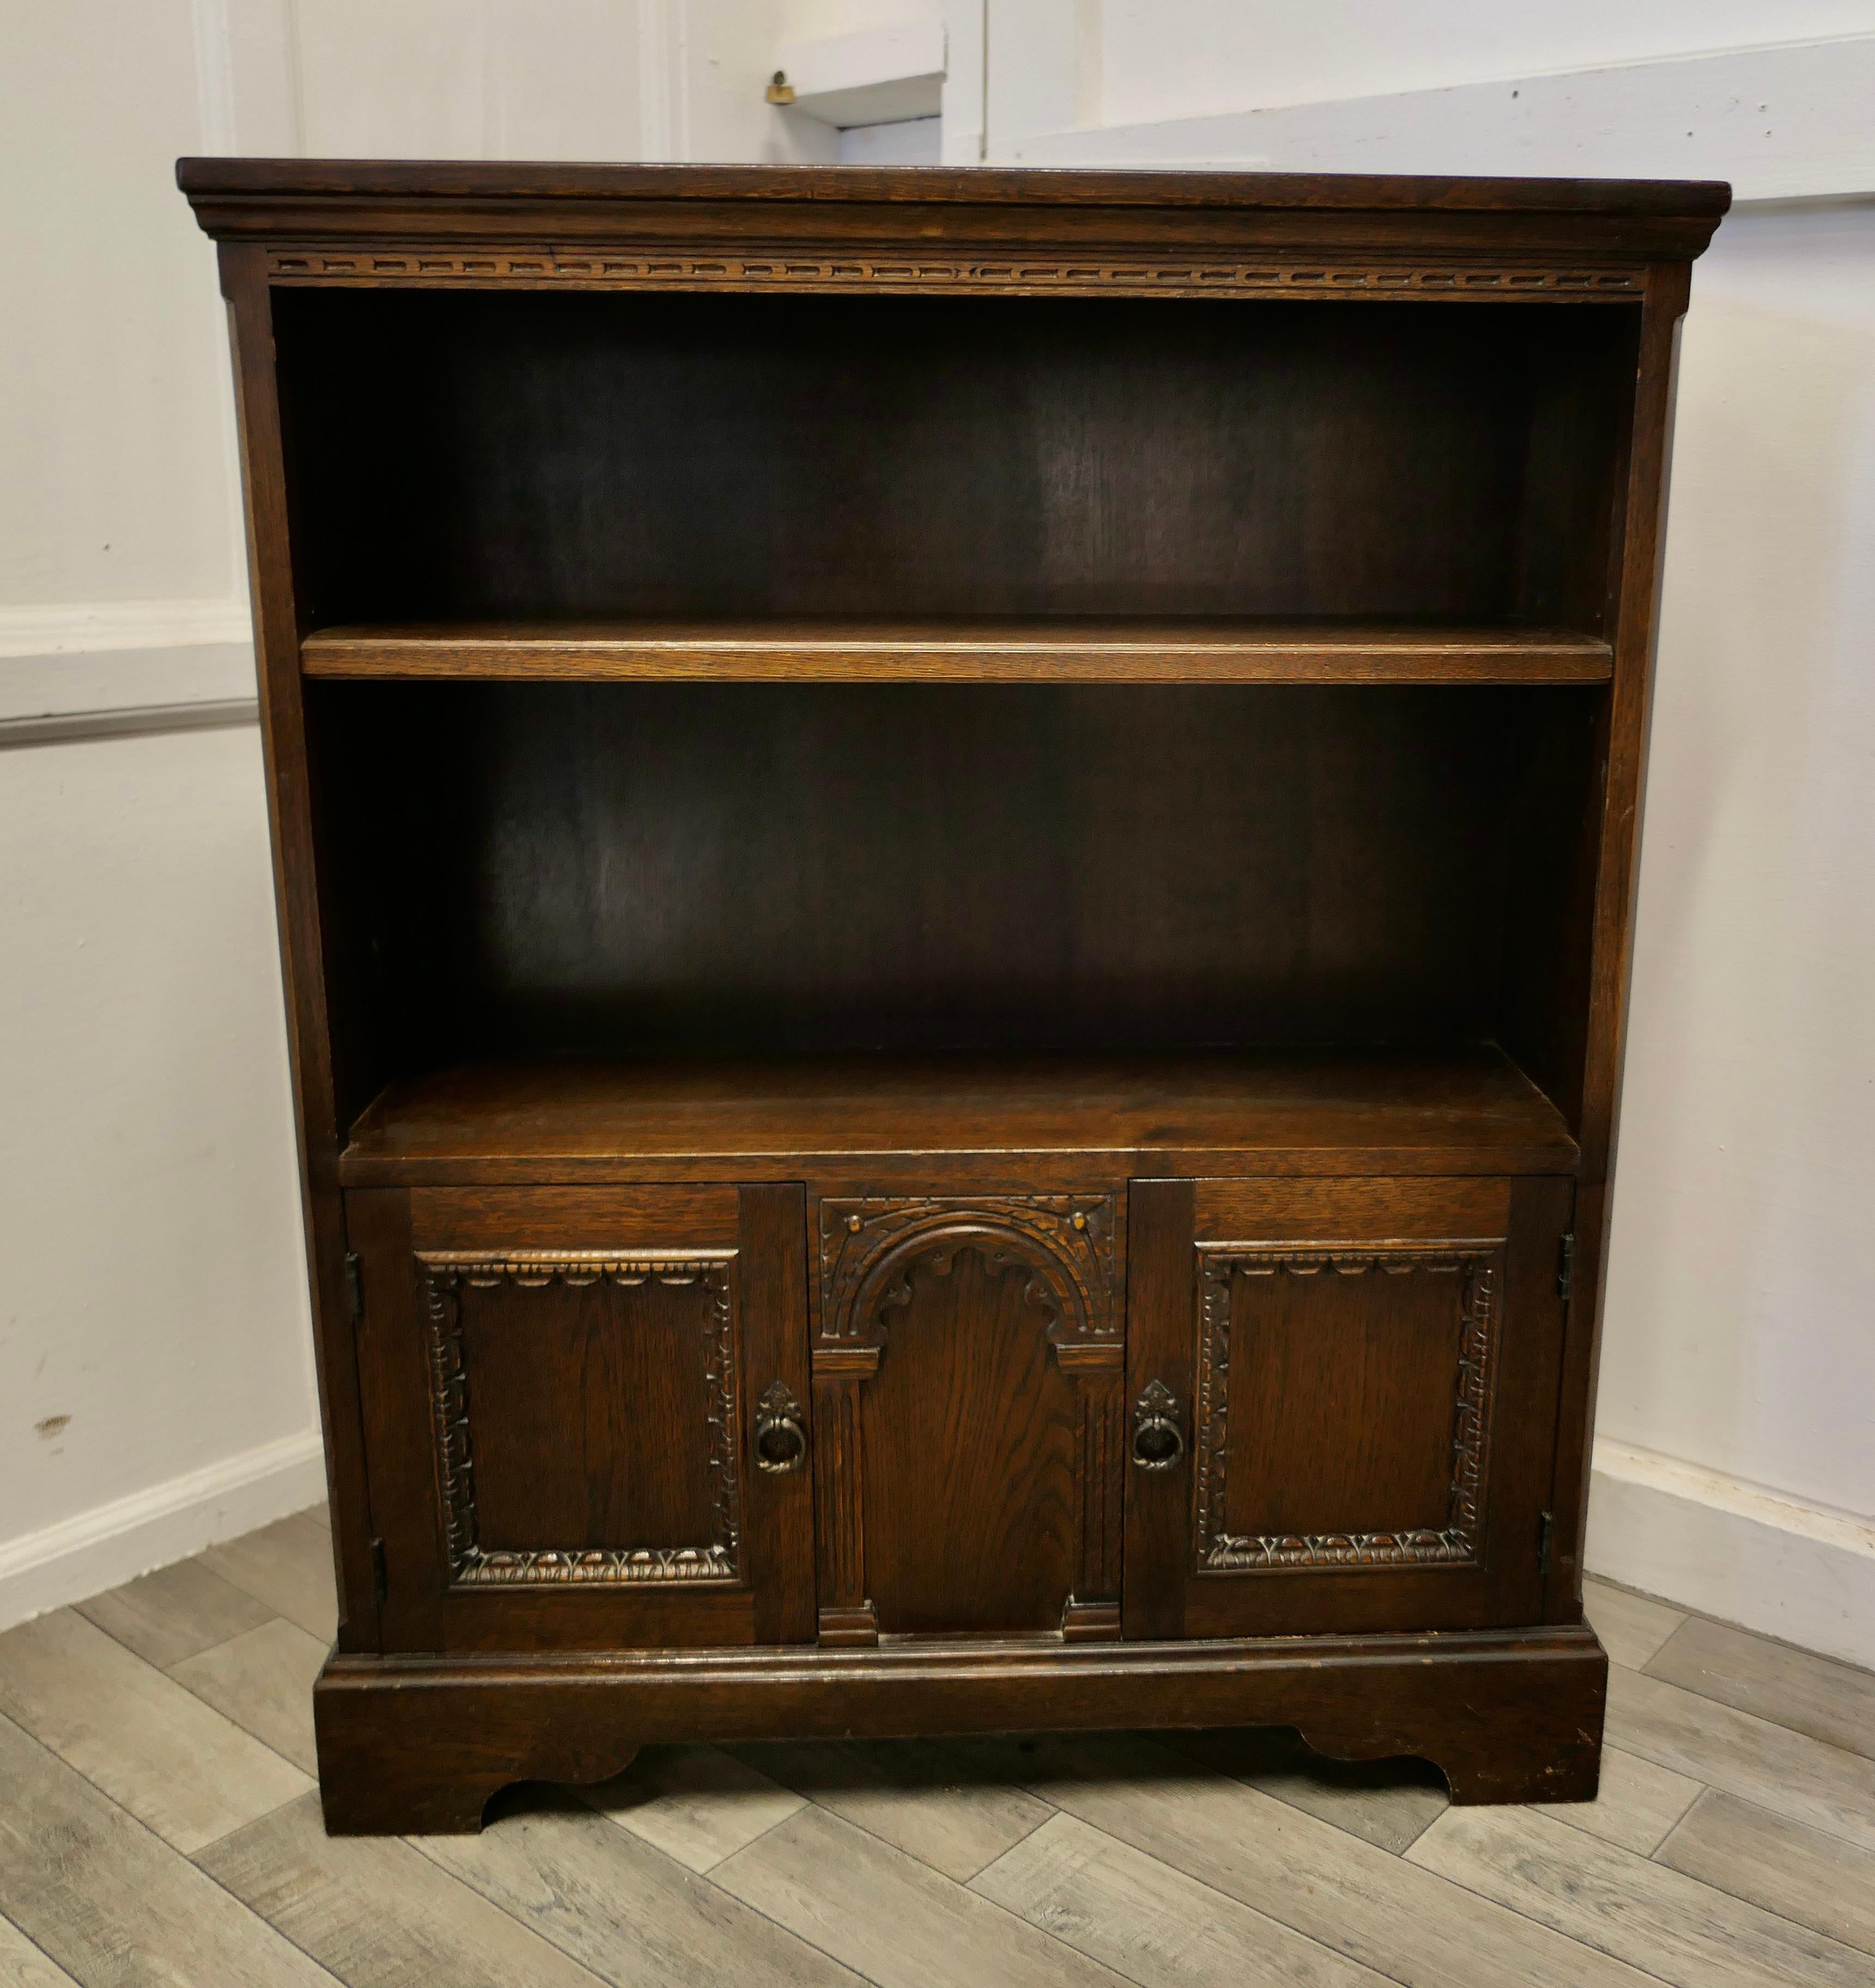 Gothic Carved Oak open bookcase with Cupboard by Old Charm

A Charming little piece dating from about 1920, the bookcase has an adjustable shelf and a long cupboard at the bottom with two doors and central panel
The Cupboard is made by Old Charm,